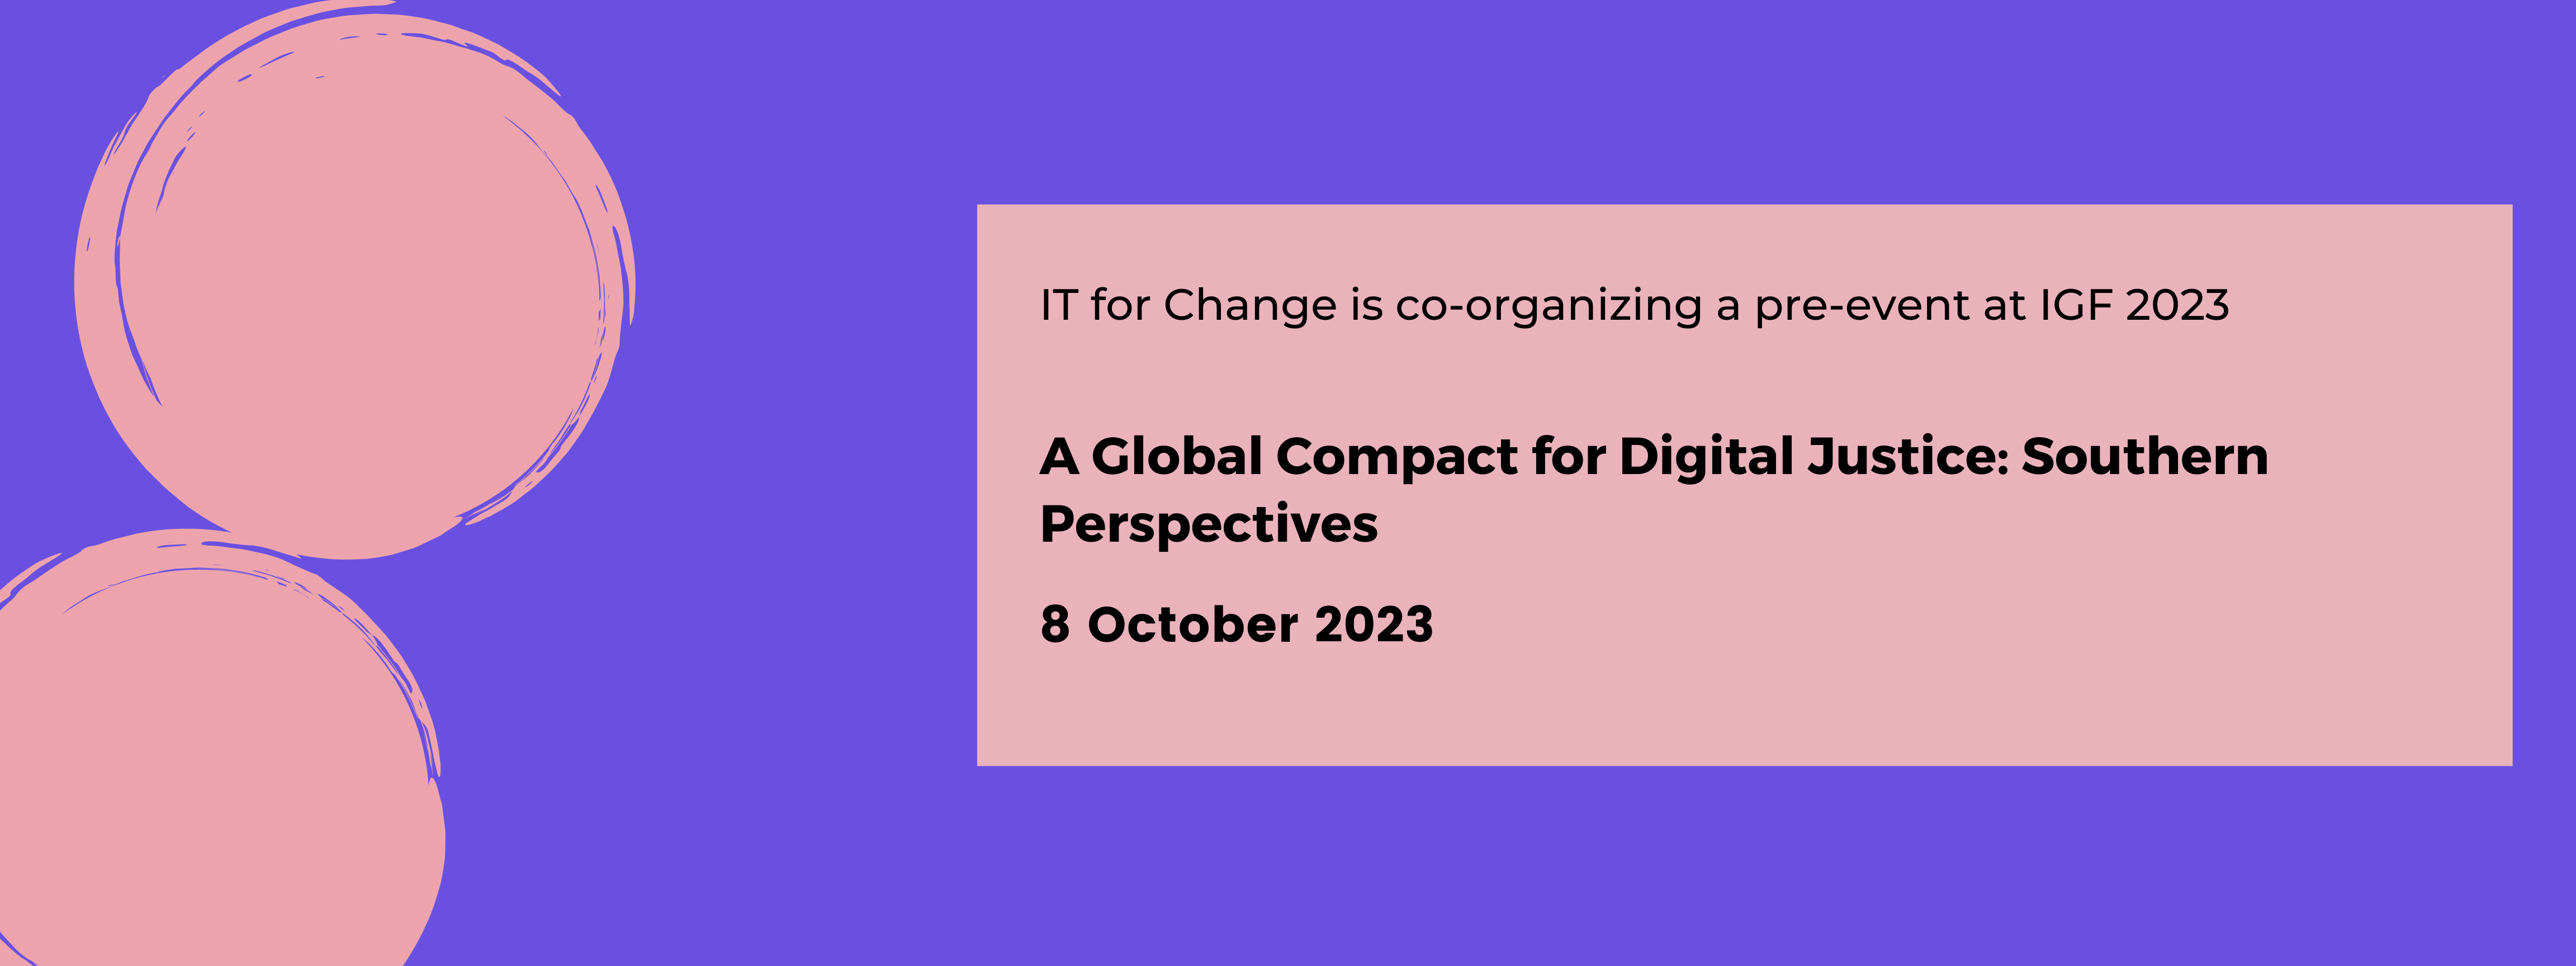 A Global Compact for Digital Justice: Southern Perspectives